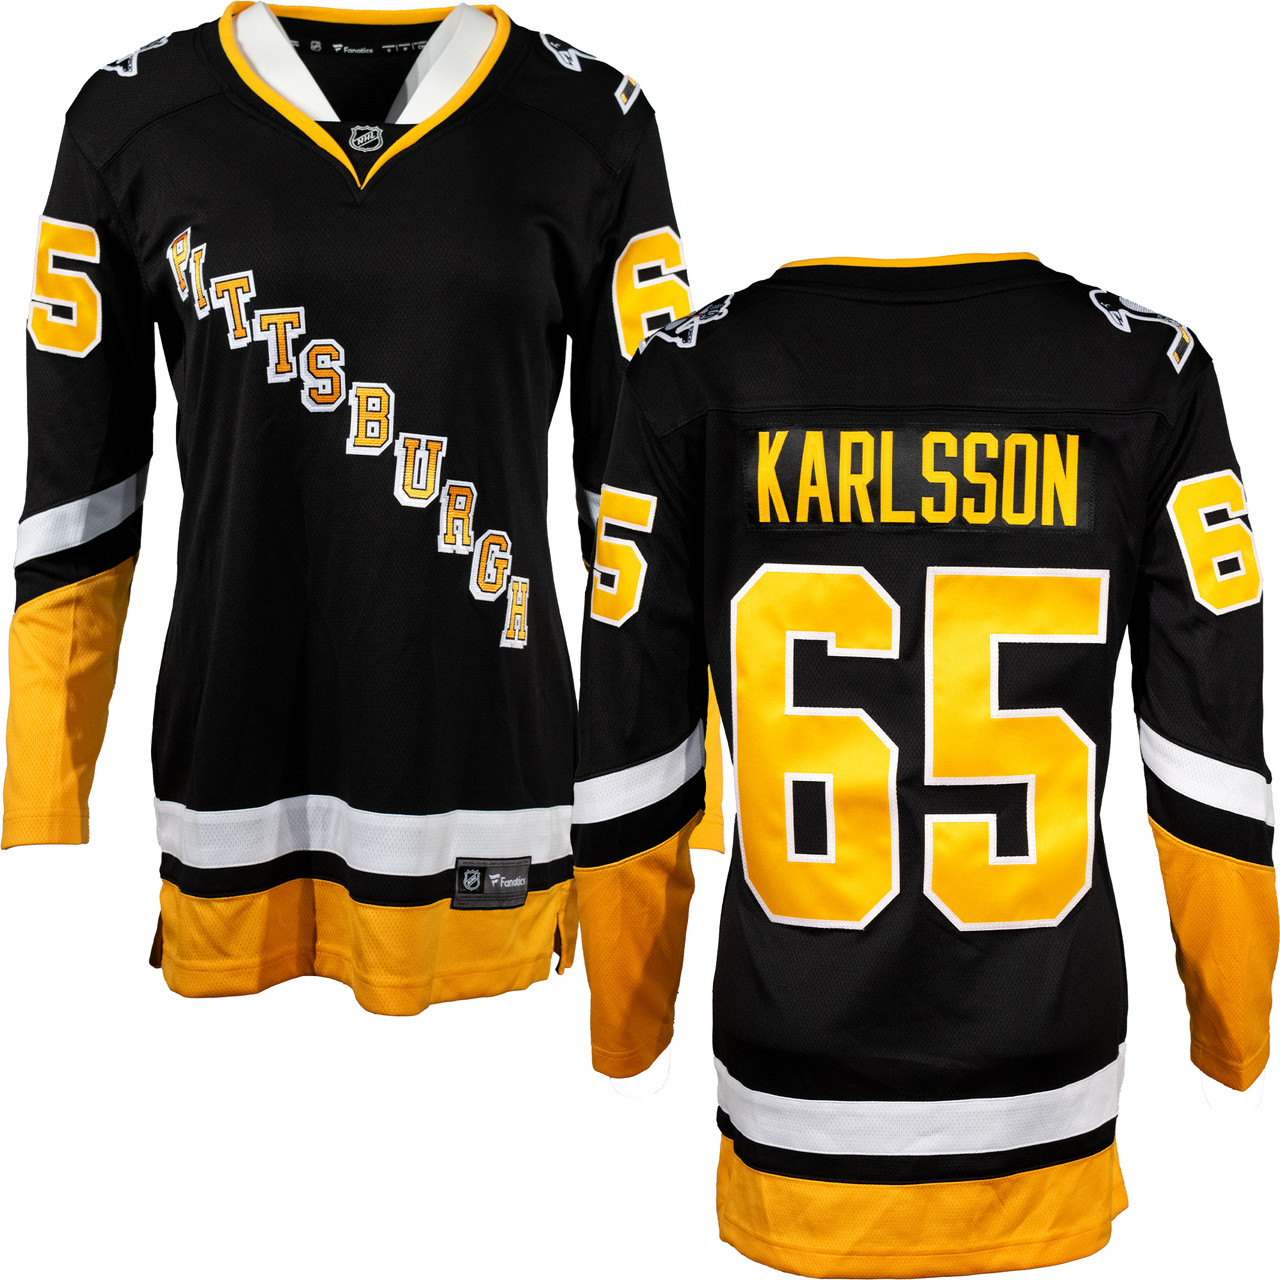 Pittsburgh Penguins Replica Home Jersey - Youth